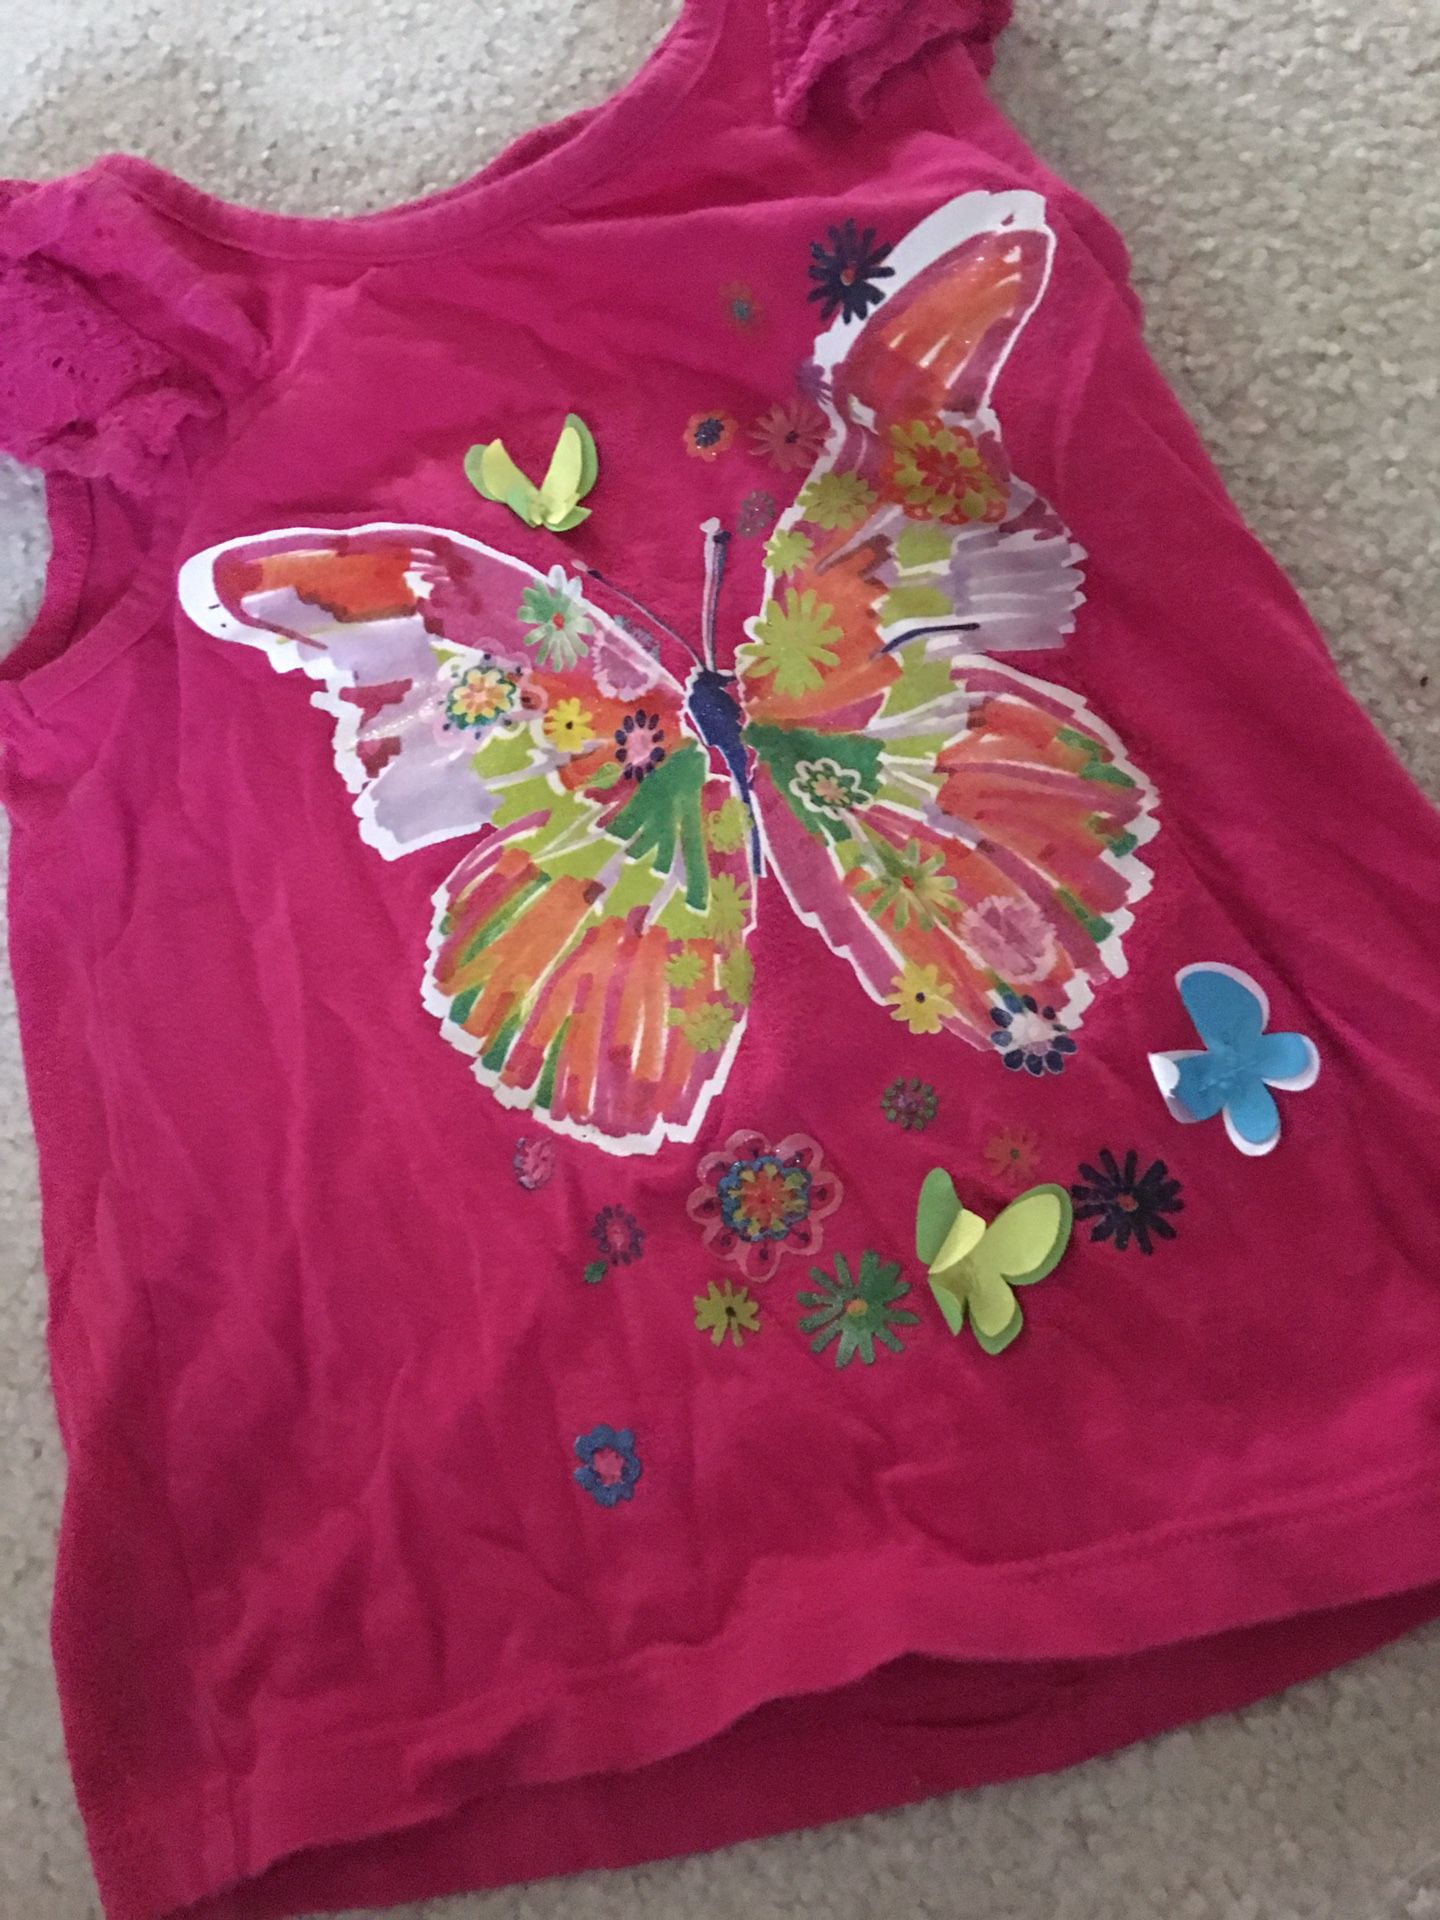 Two butterfly shirts